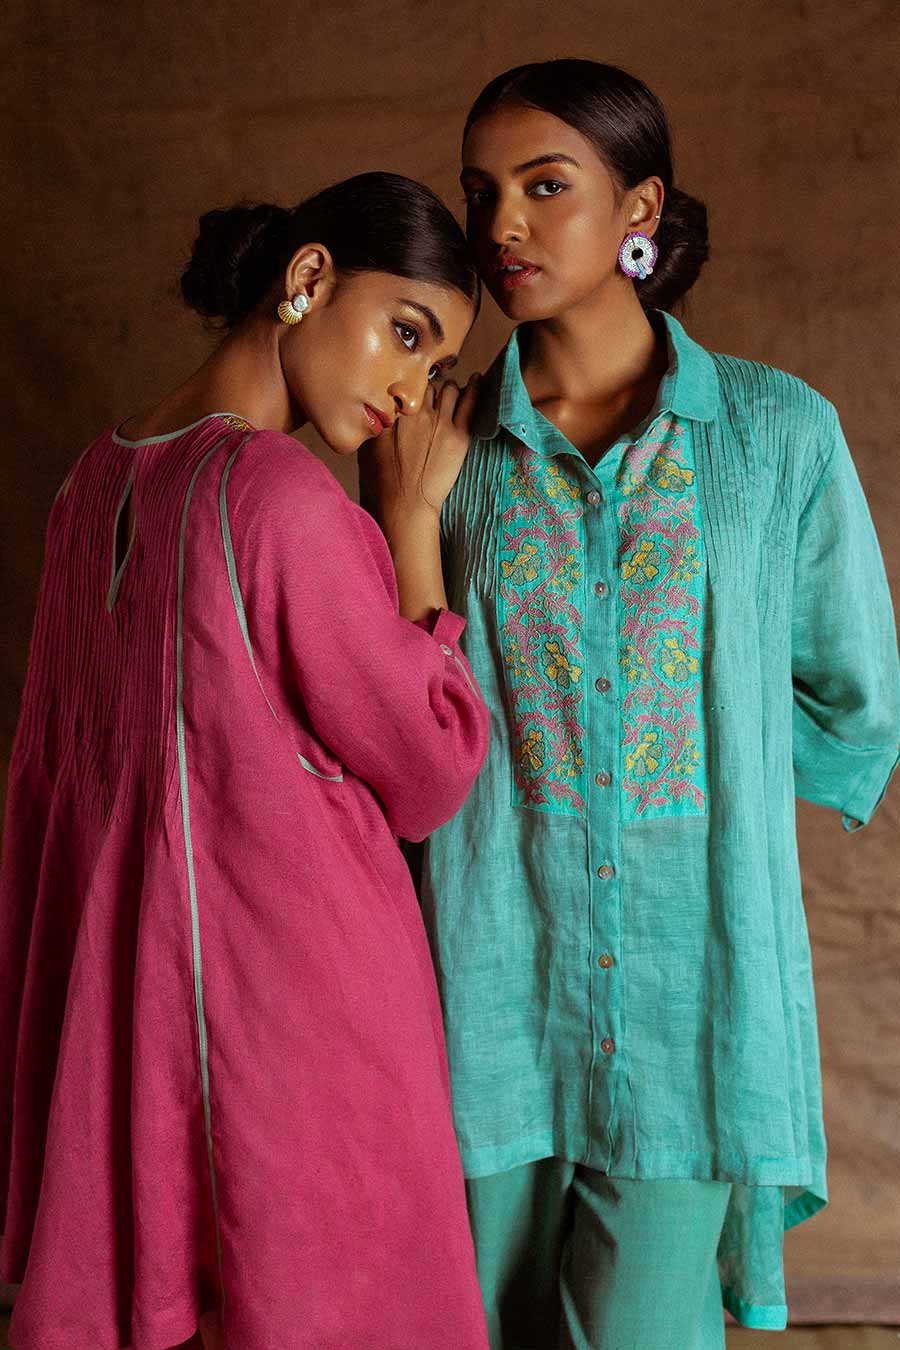 Sea Blue Linen Embroidered Tunic Shirt